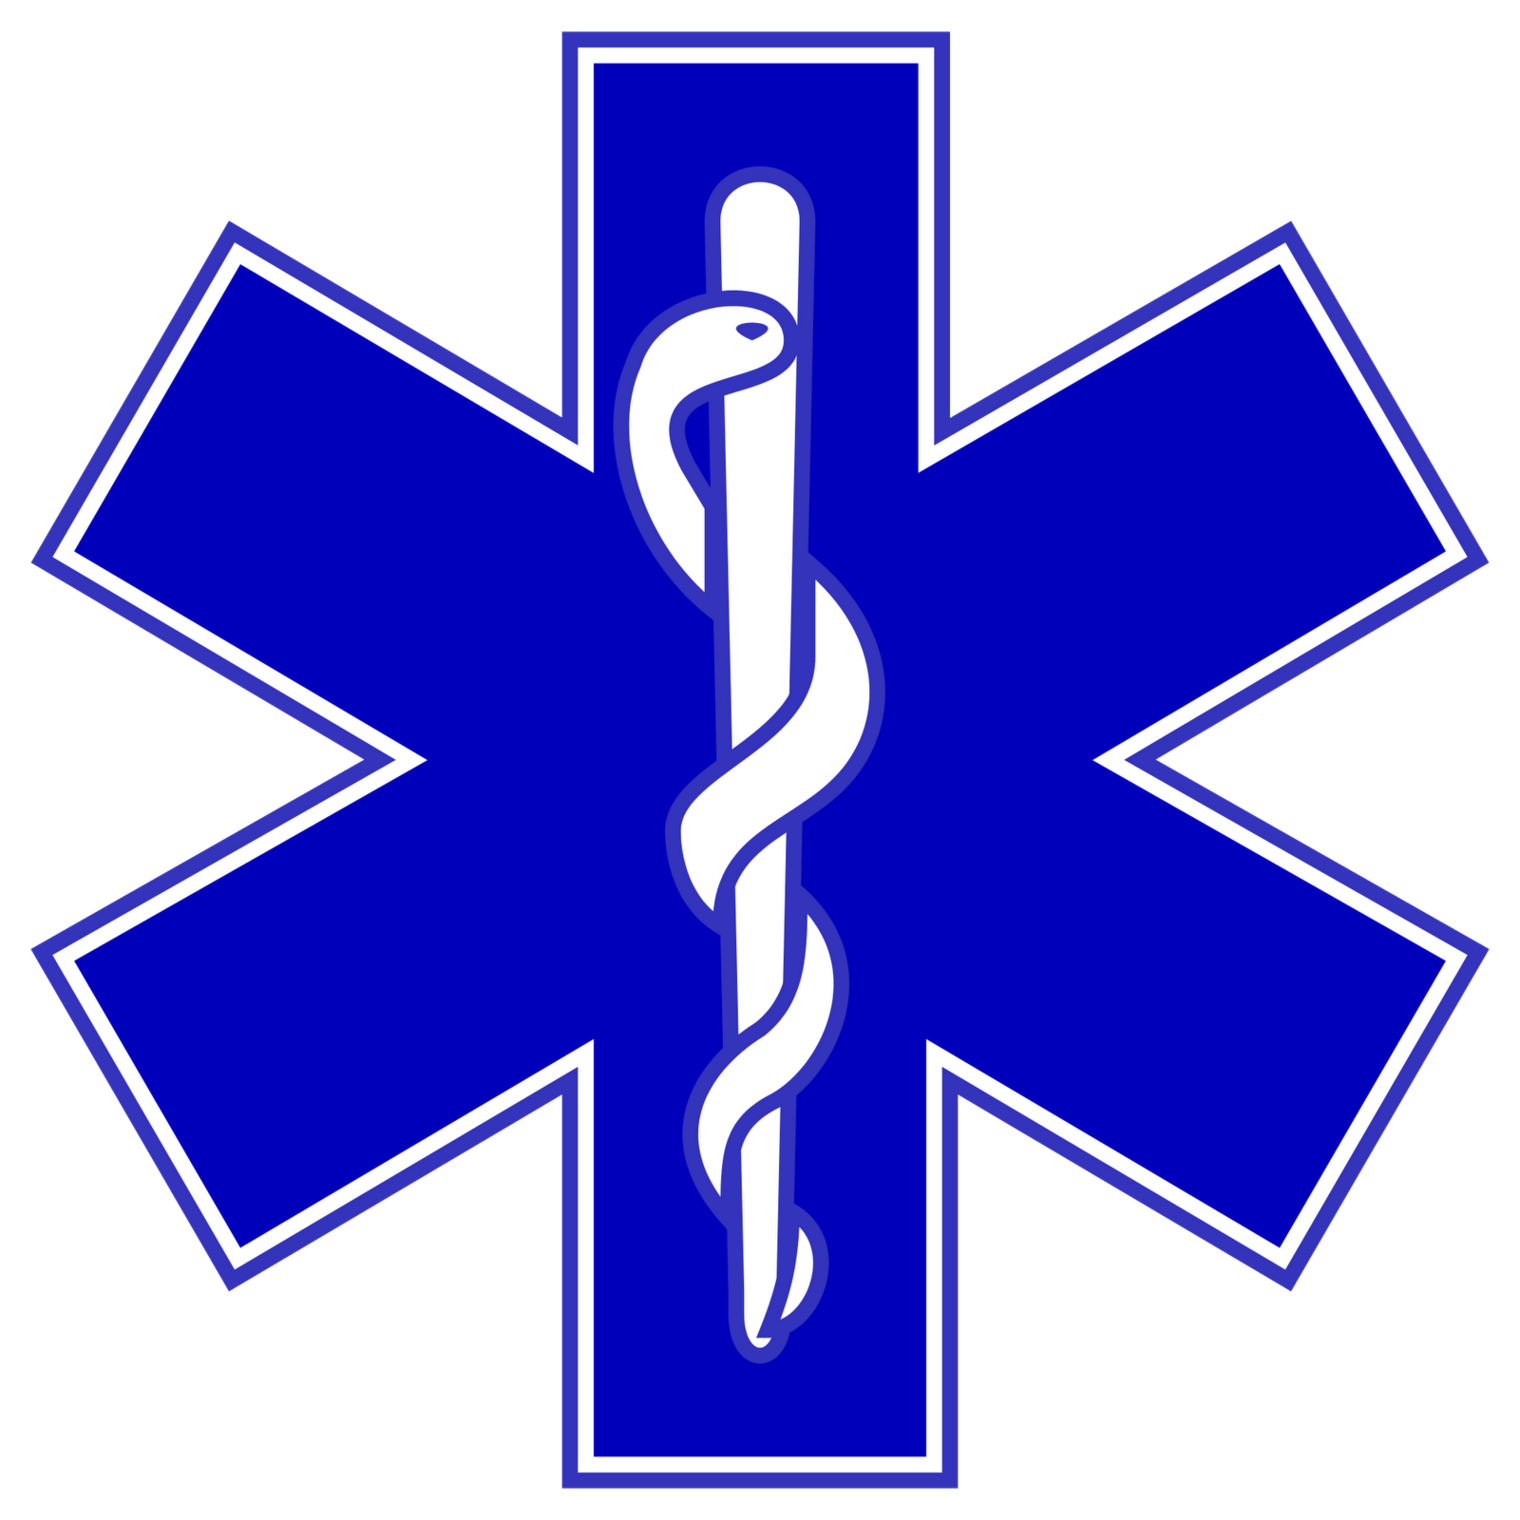 Medical Symbol Png Clipart - Free to use Clip Art Resource